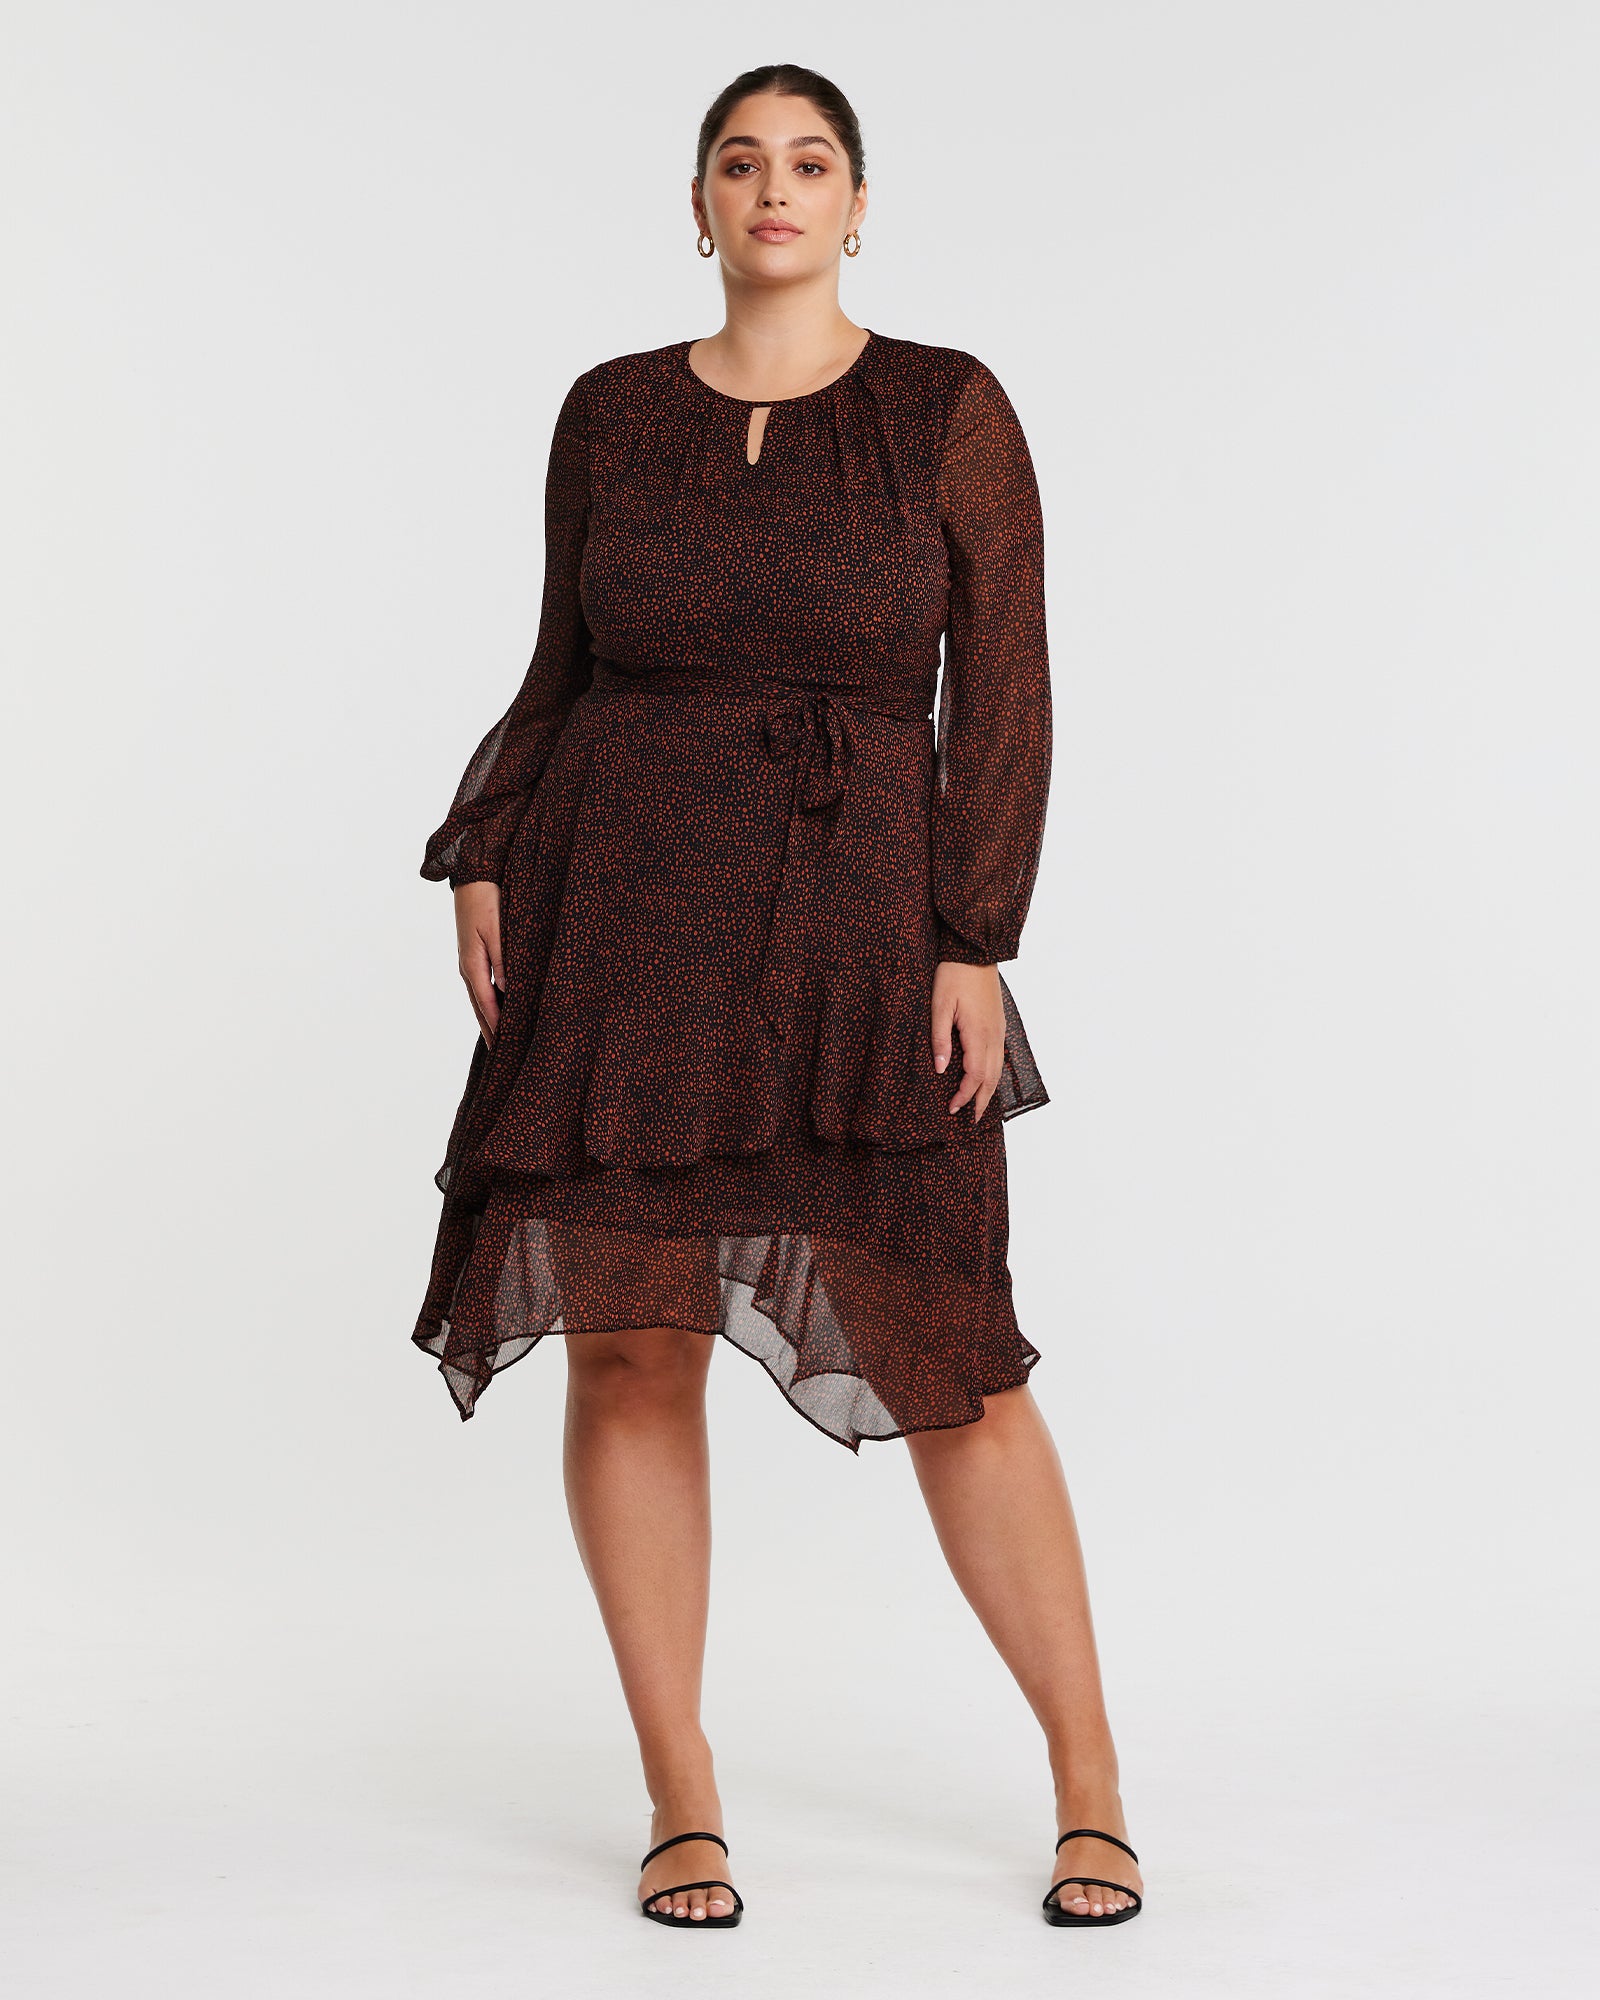 The model is wearing a Camilla Dot Dress with a handkerchief hemline and long sleeves.